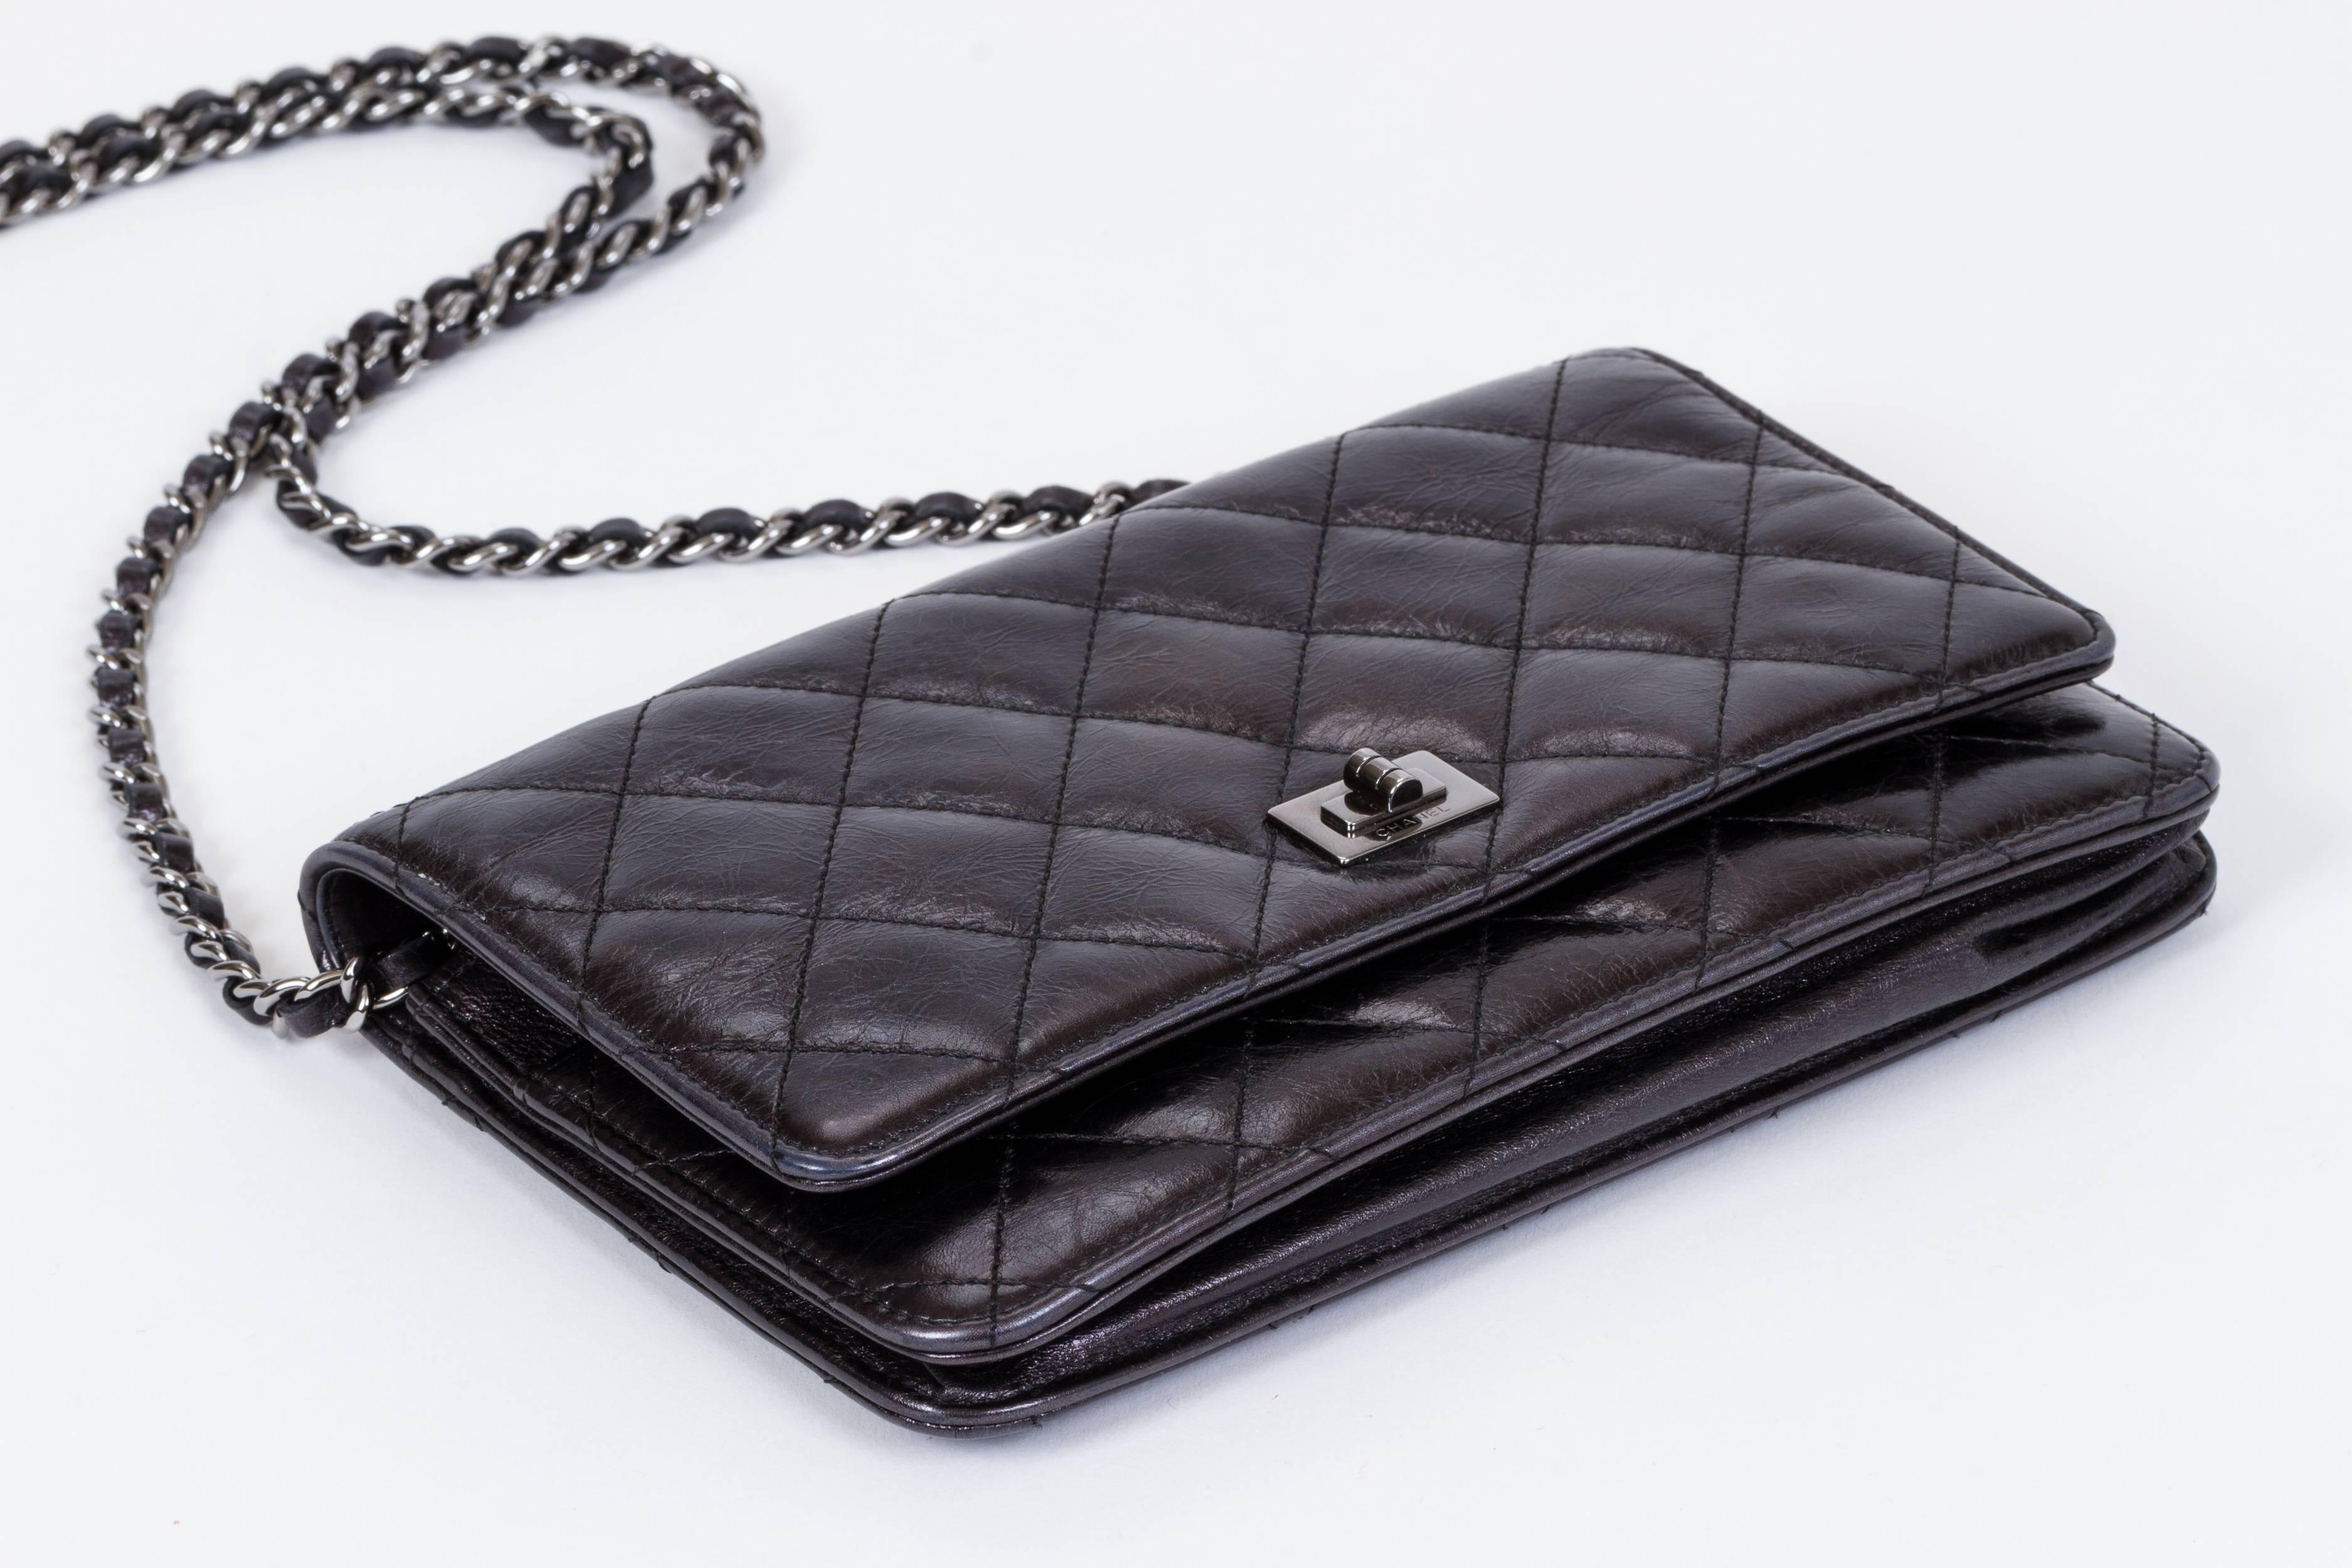 Chanel Reissue Black Wallet On A Chain 1